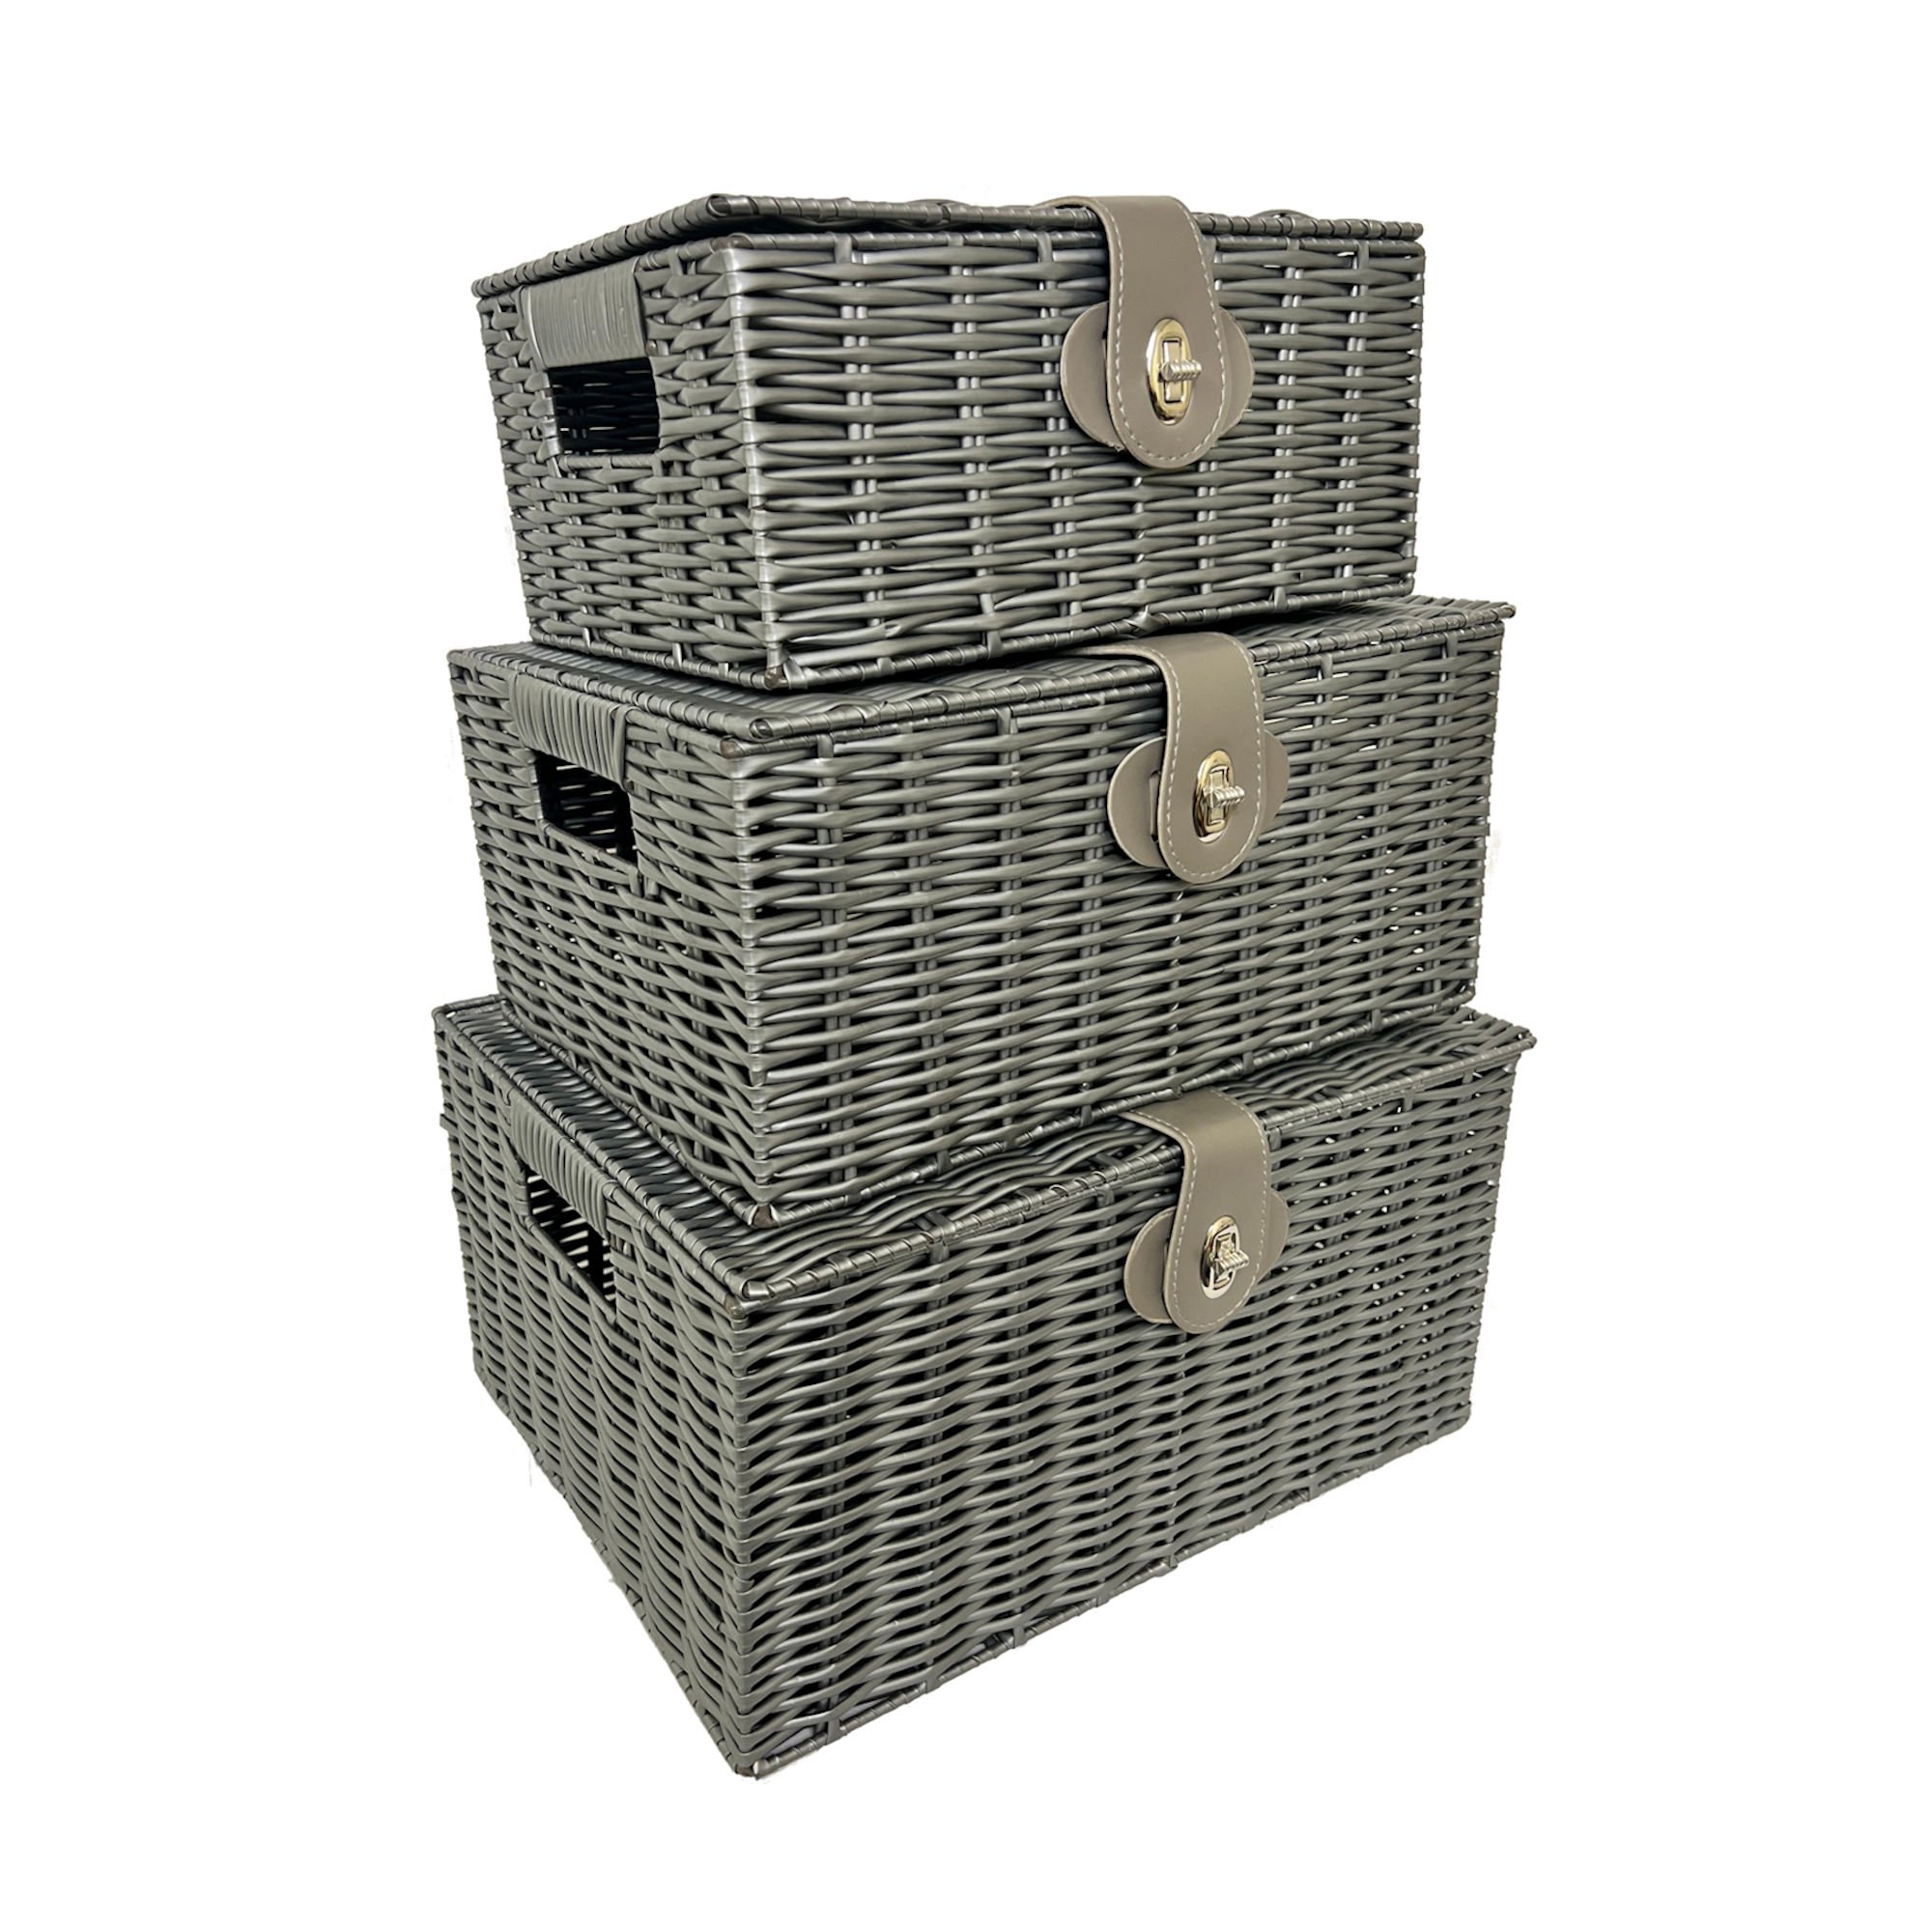 Set of 3 Grey Resin Woven Wicker Style Baskets Hampers Storage Boxes